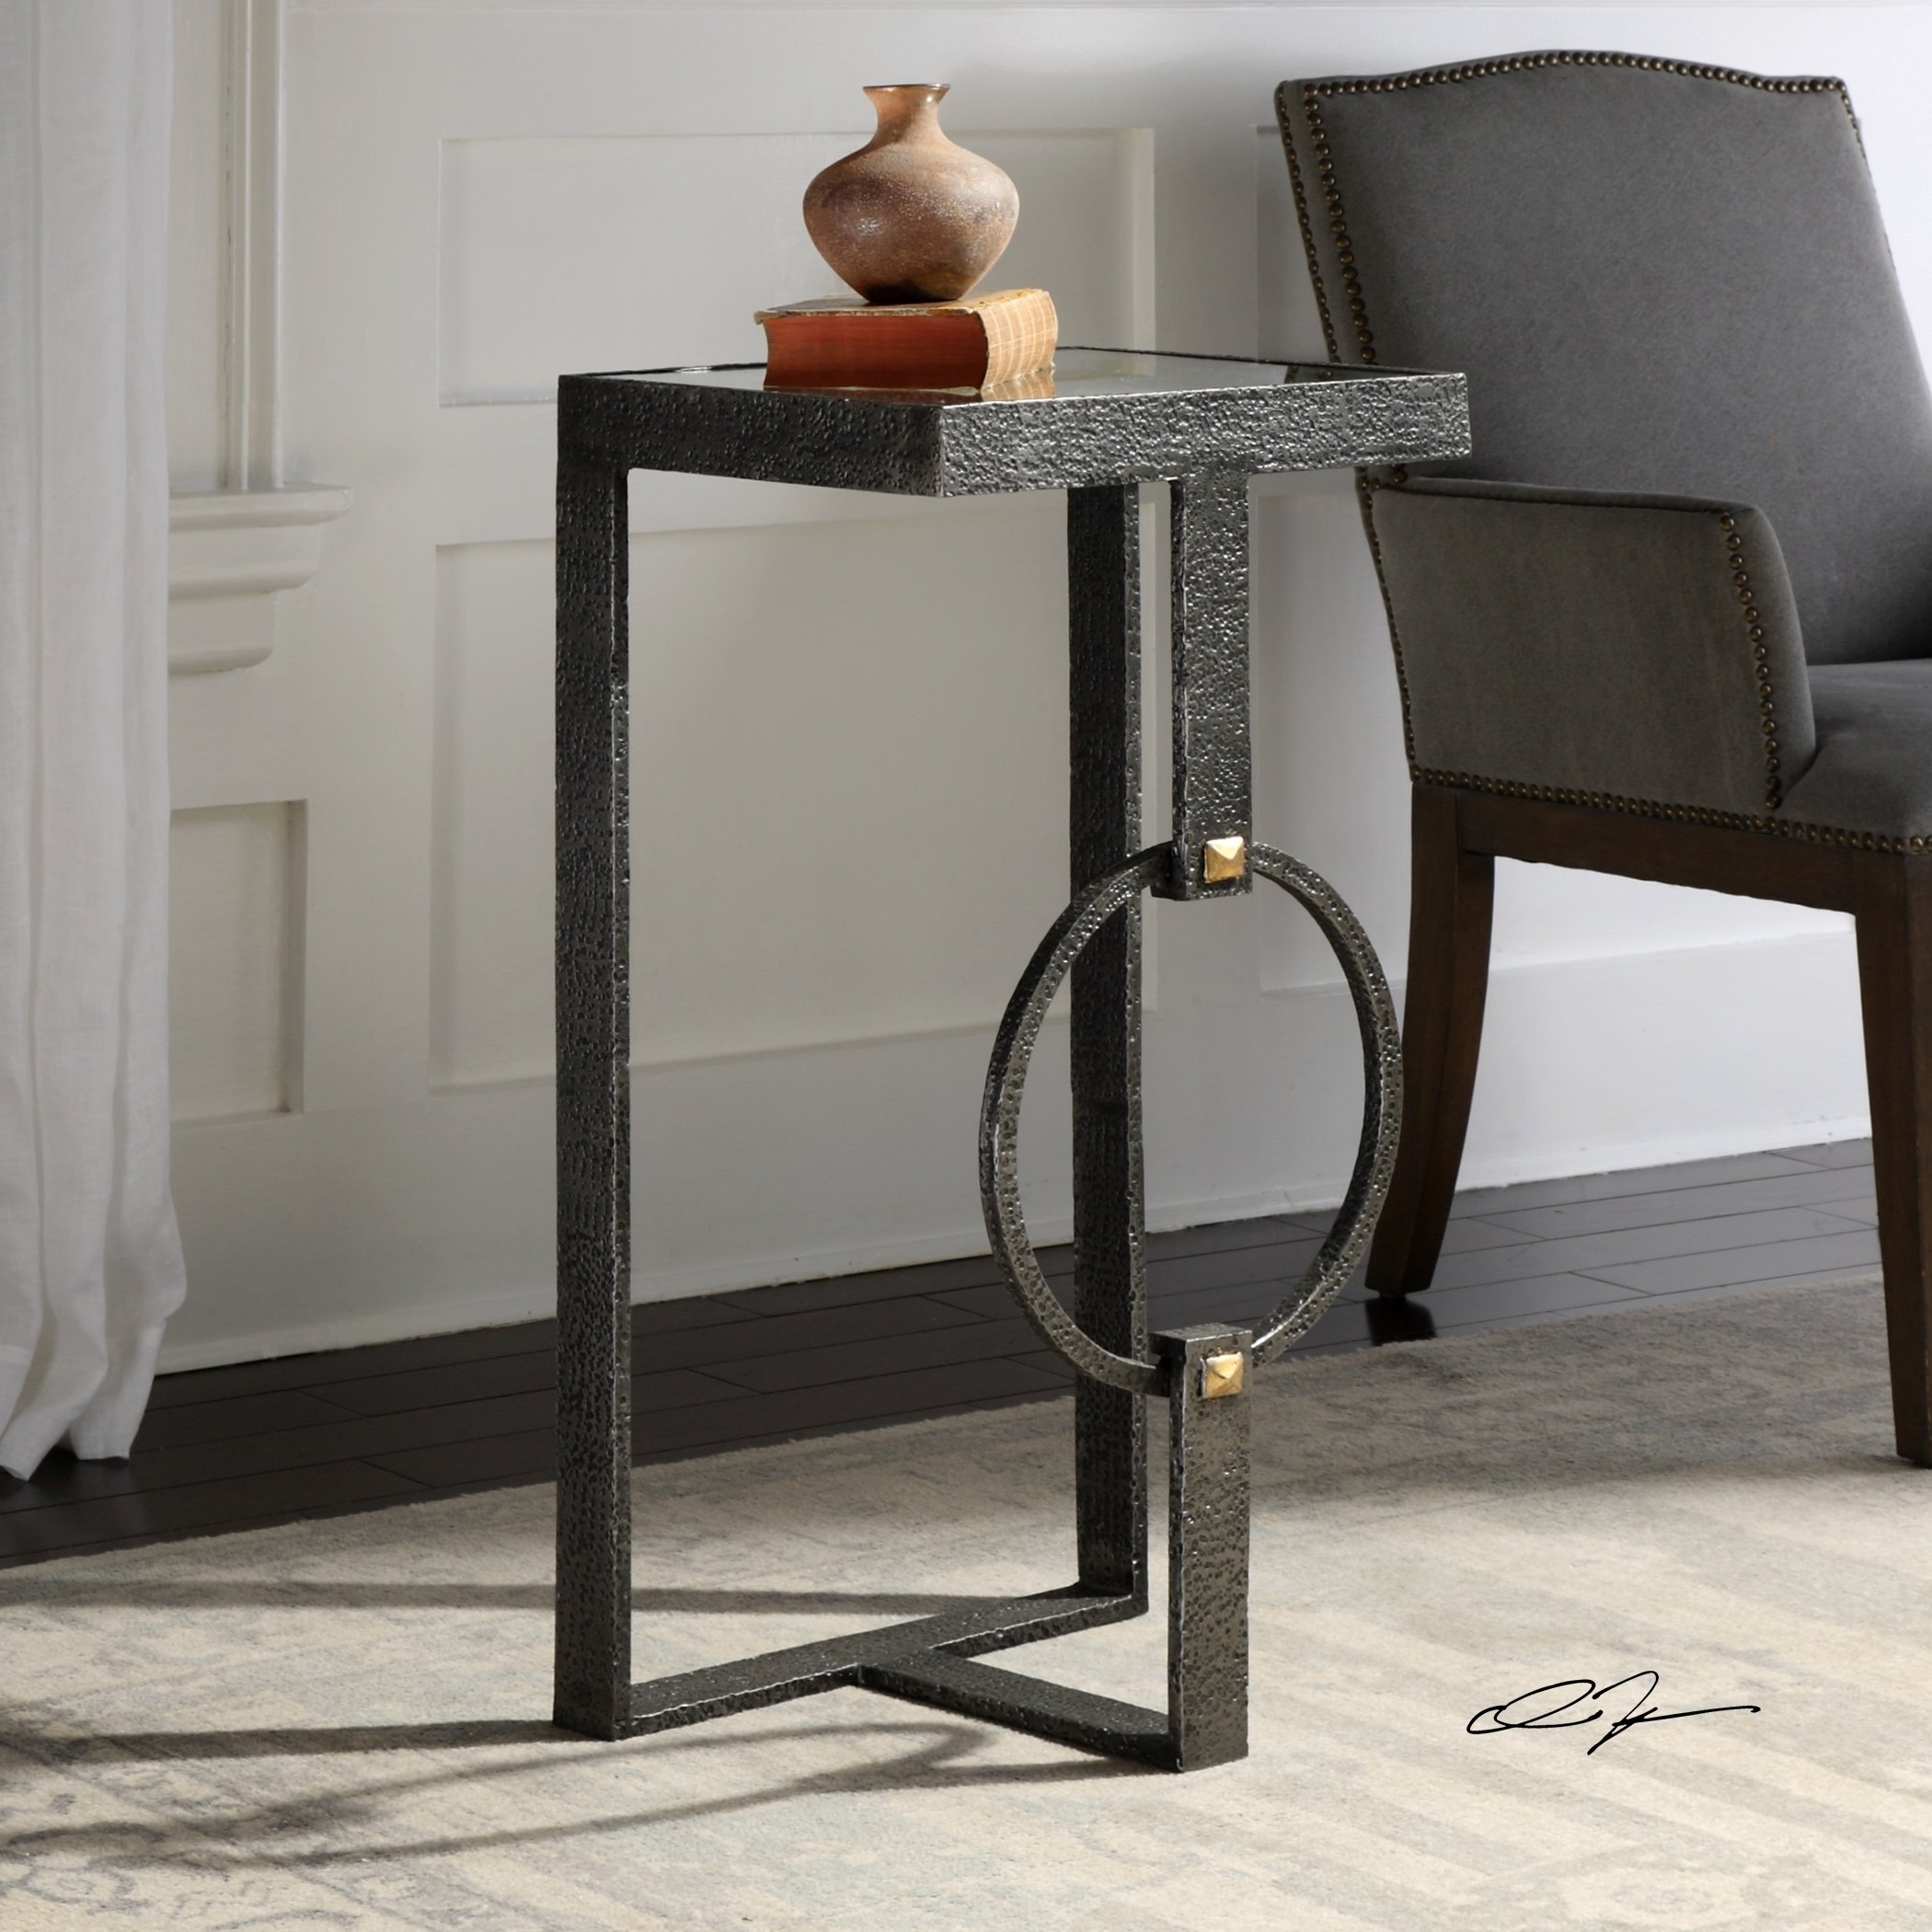 uttermost hagen textured burnished steel accent table free rubati shipping today small nest tables ikea inch tablecloth west elm round coffee tiffany shades market umbrella stand